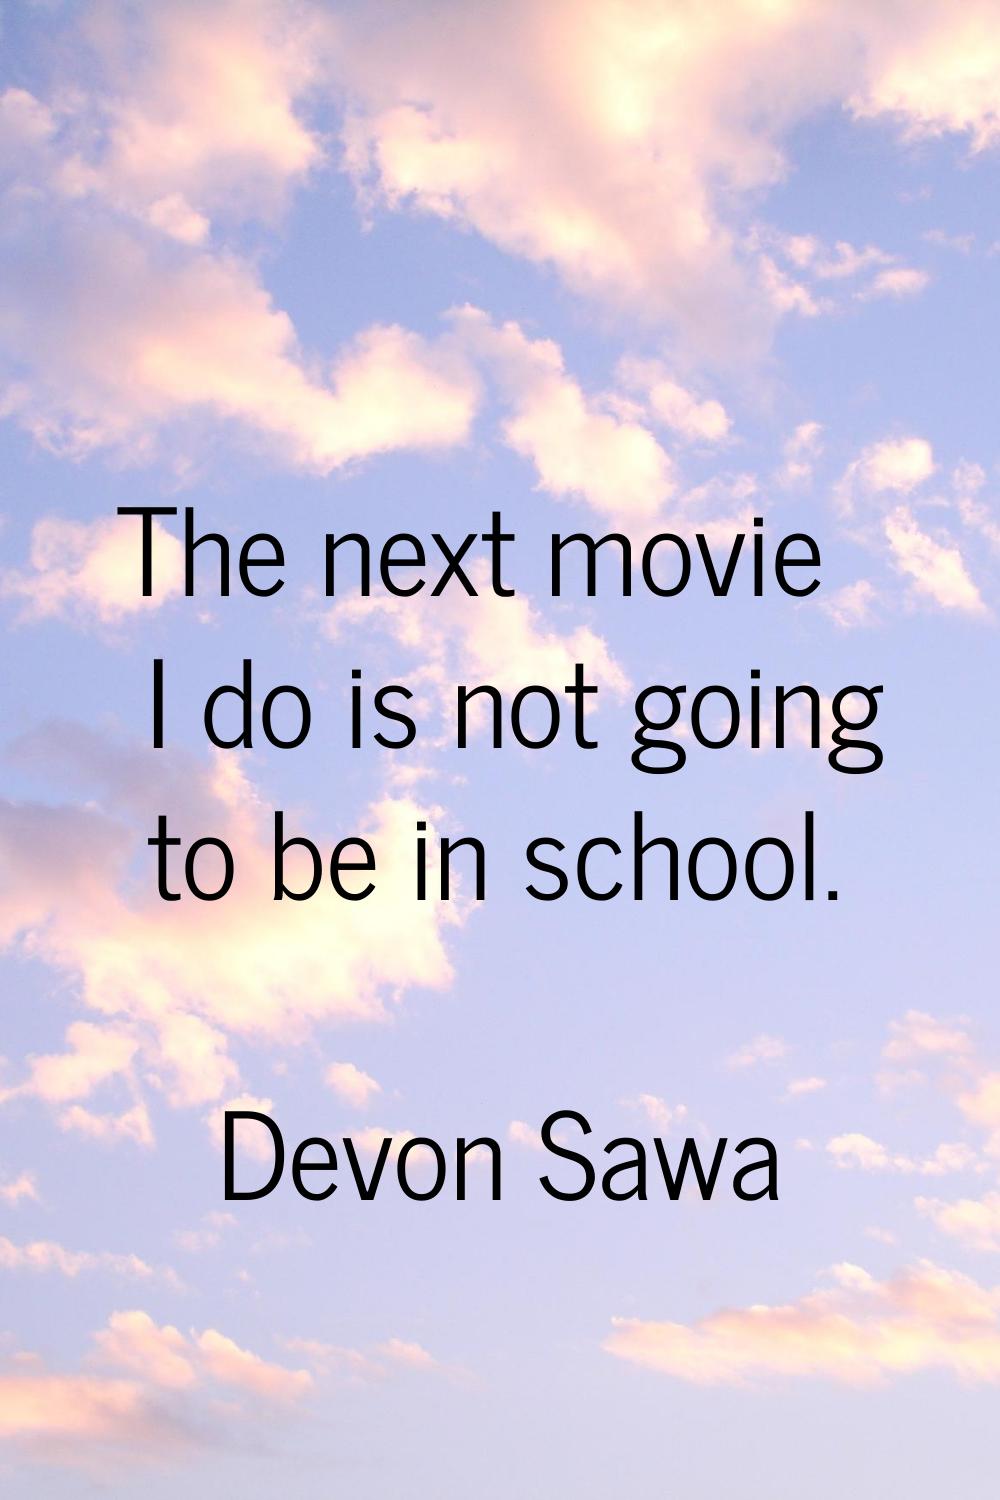 The next movie I do is not going to be in school.